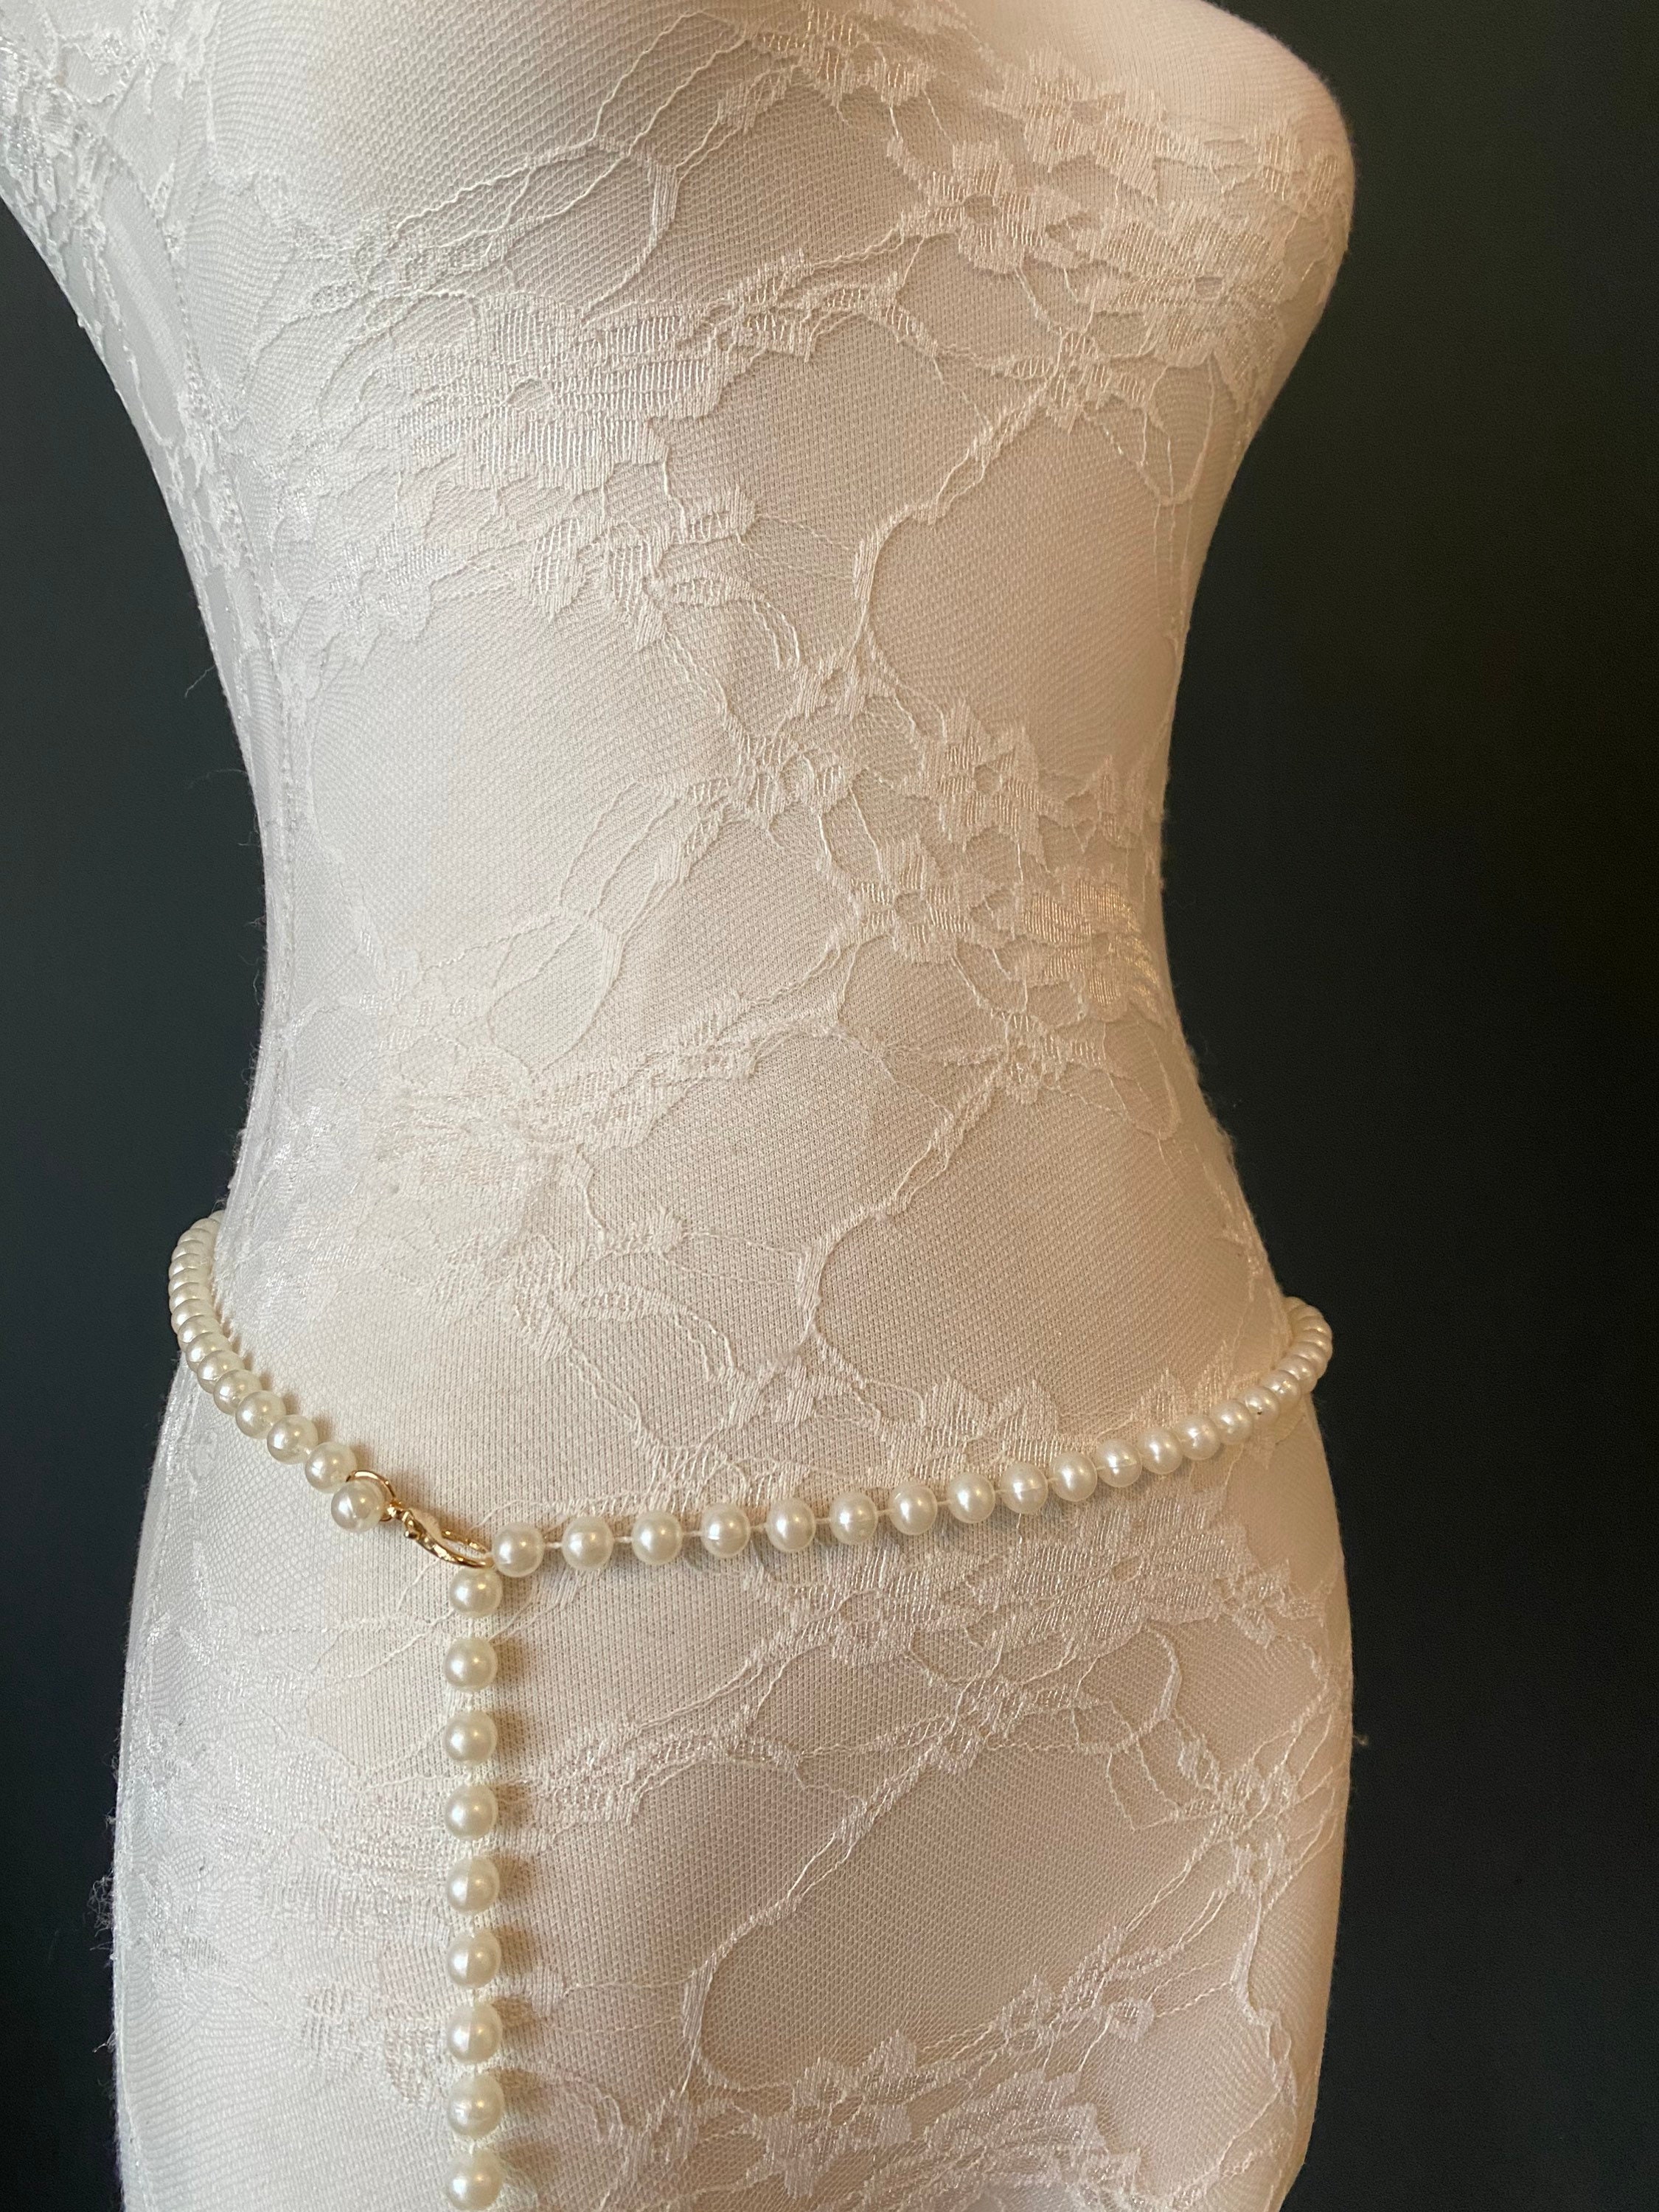 Braided Leather Dainty Gold Rope Belt, Dainty Pearl Belt, Gold Rope Belt,  Dainty Rope Belt, Gold Leather Rope Belt, Dainty Dress Belt 